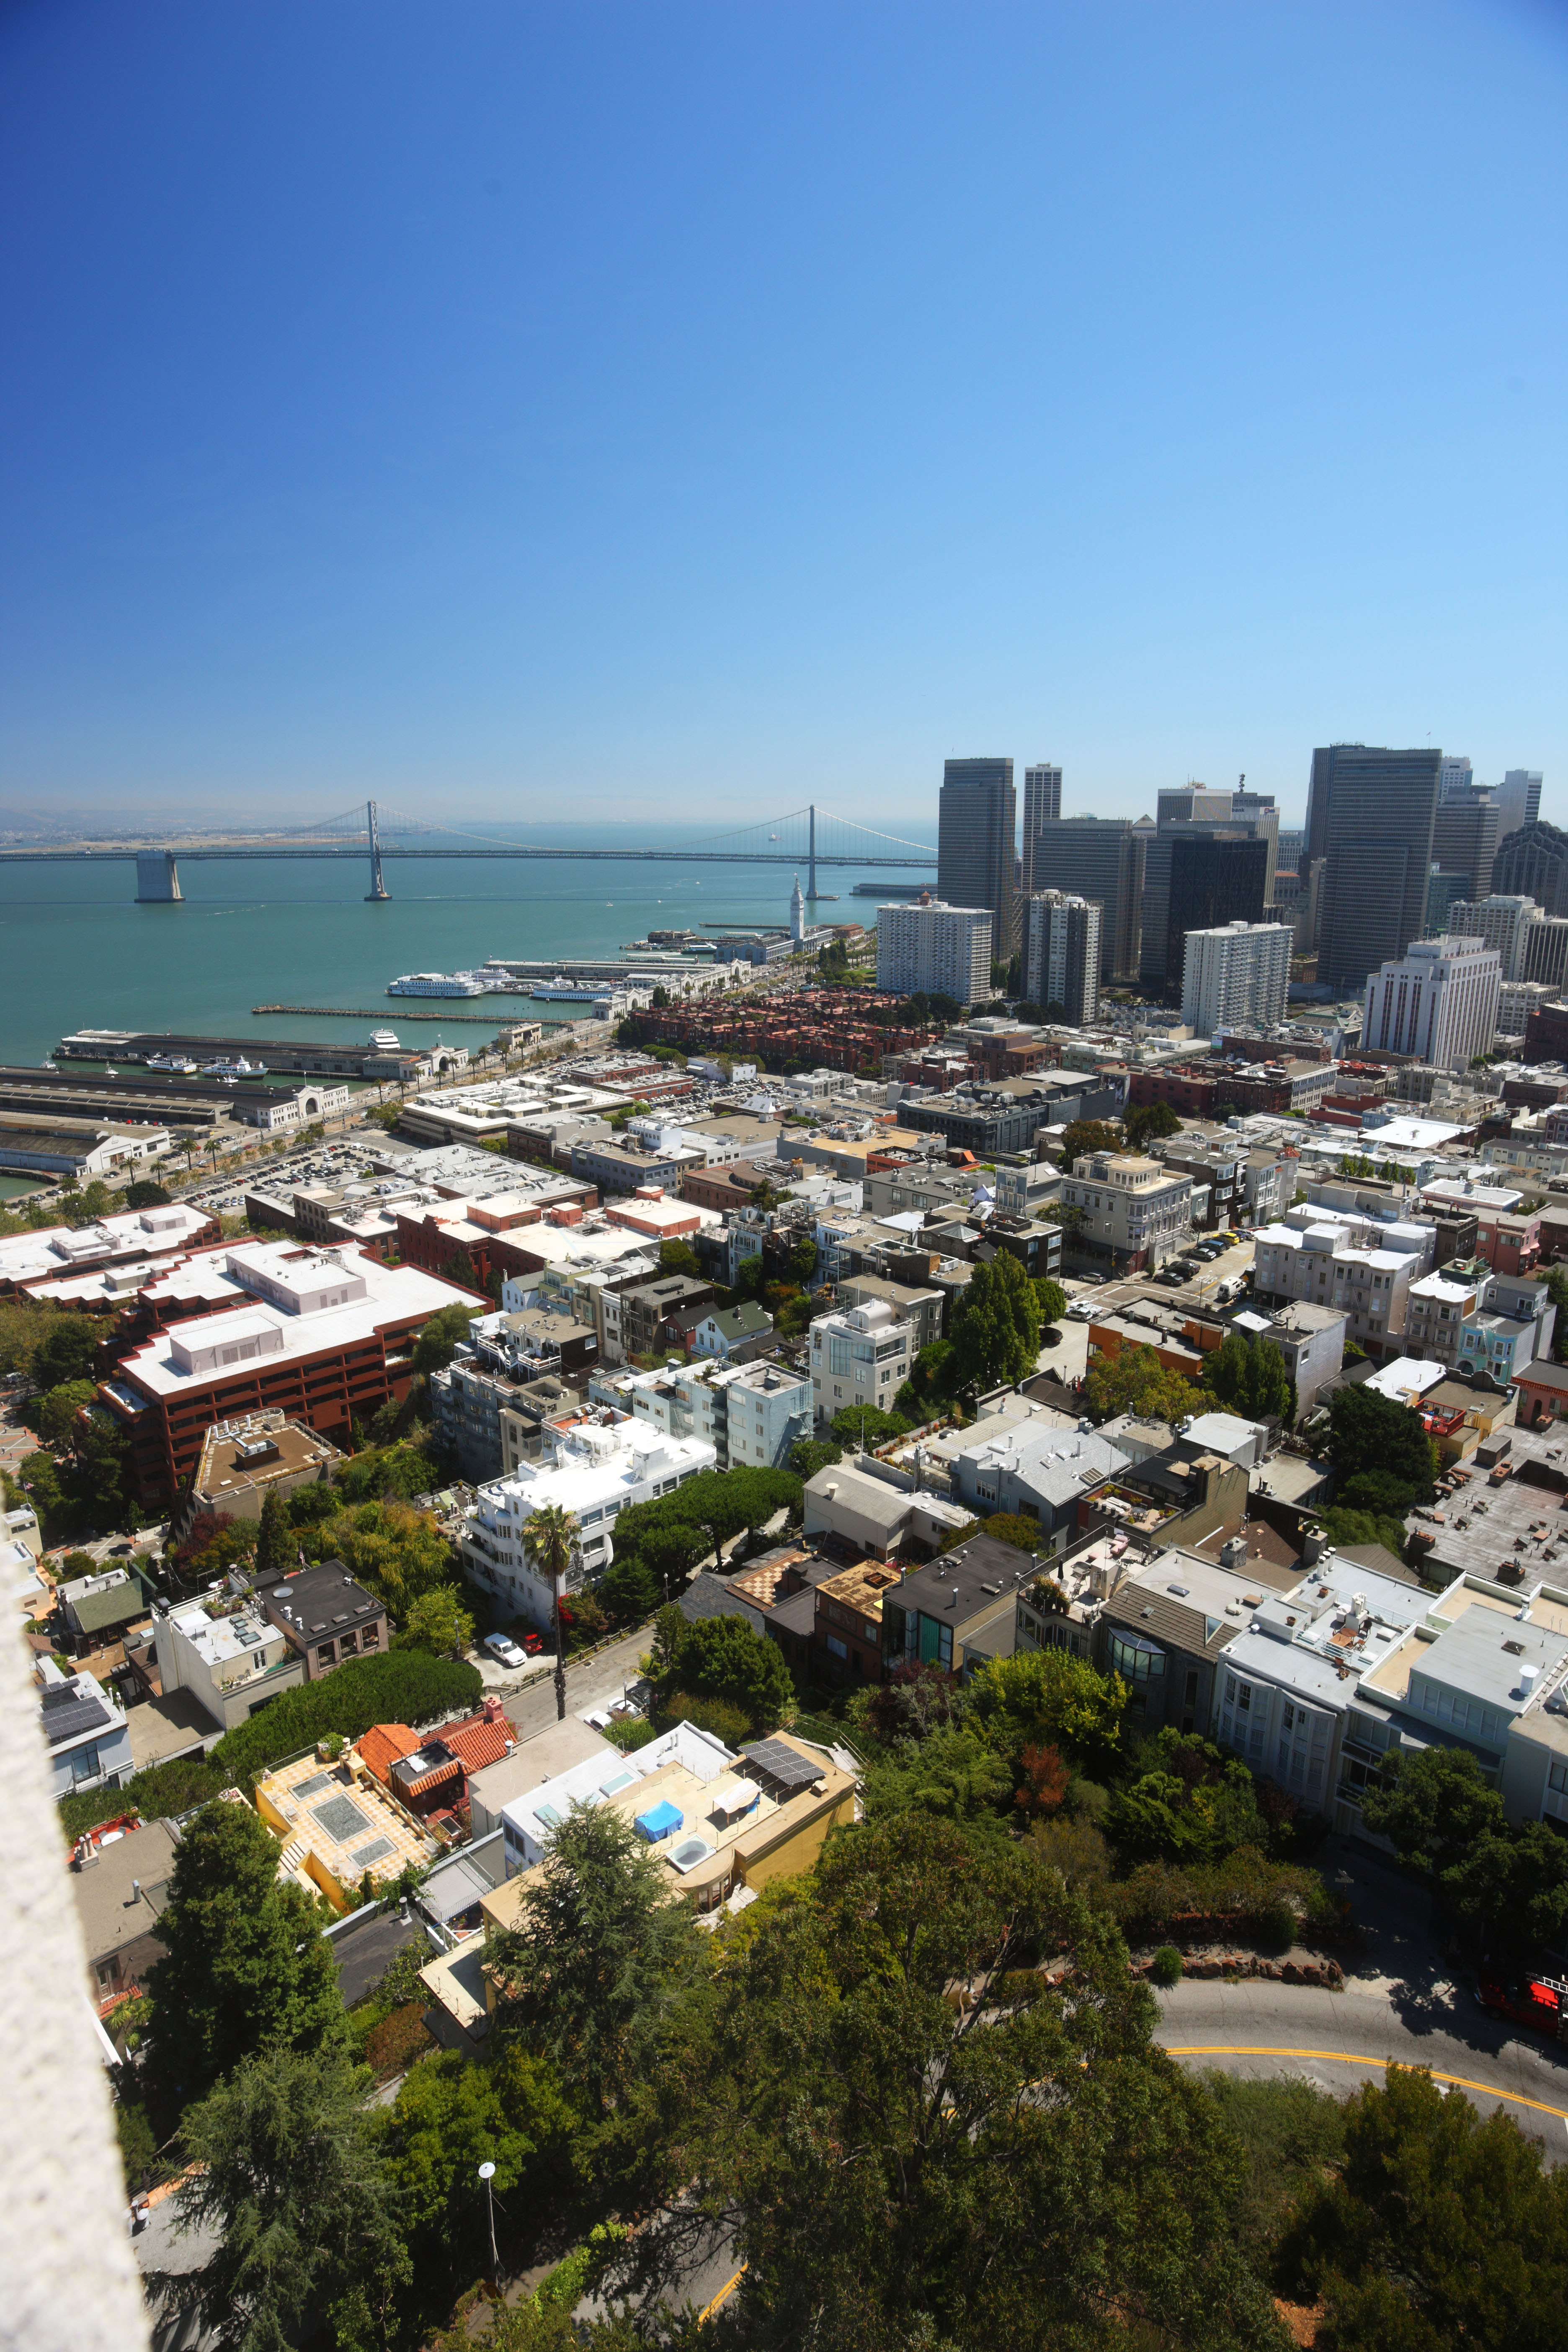 photo,material,free,landscape,picture,stock photo,Creative Commons,The sea of San Francisco, port, The Harbour Bridge, ship, residential area